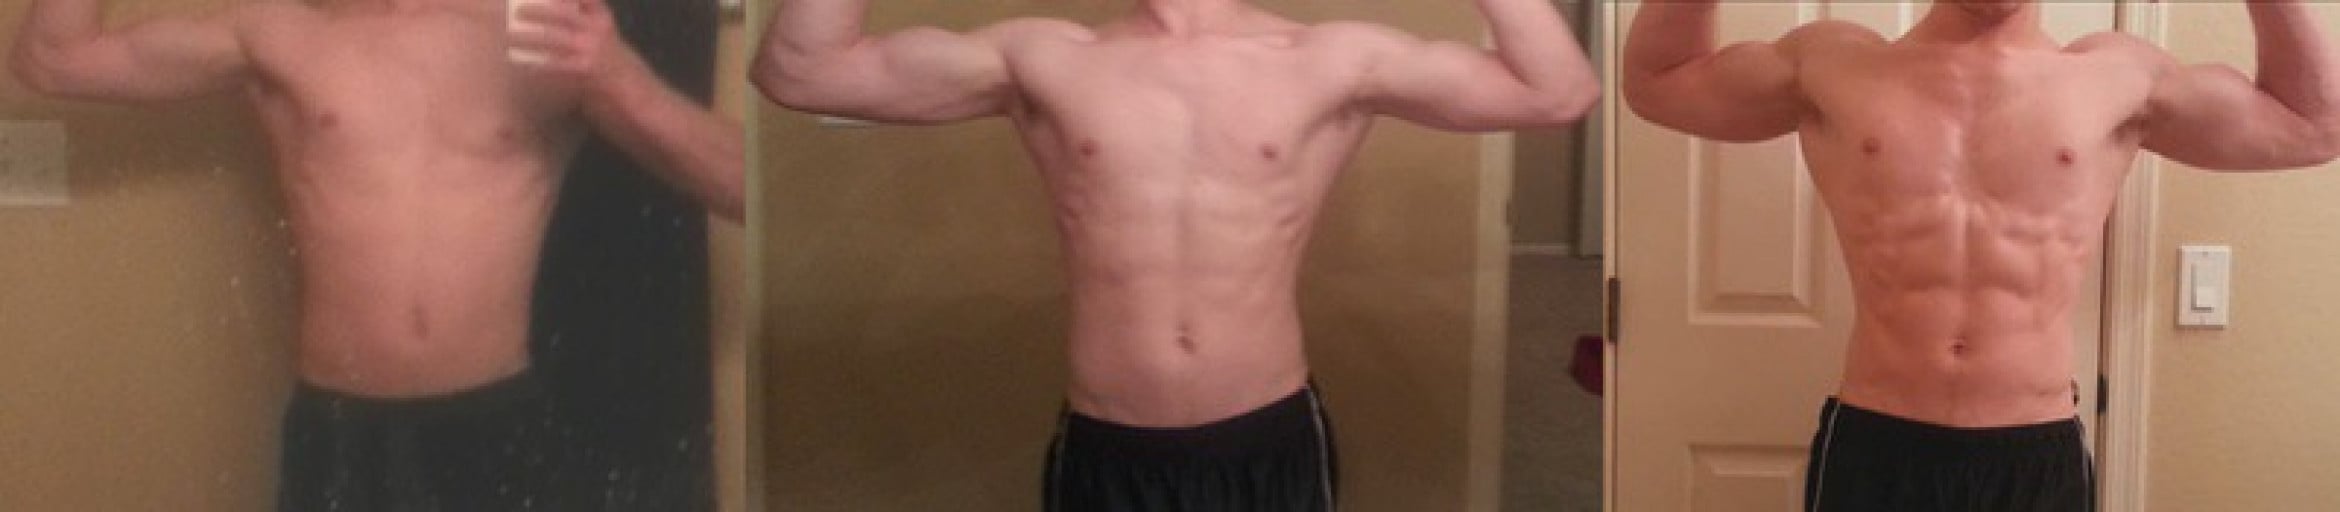 A picture of a 5'9" male showing a muscle gain from 112 pounds to 131 pounds. A respectable gain of 19 pounds.